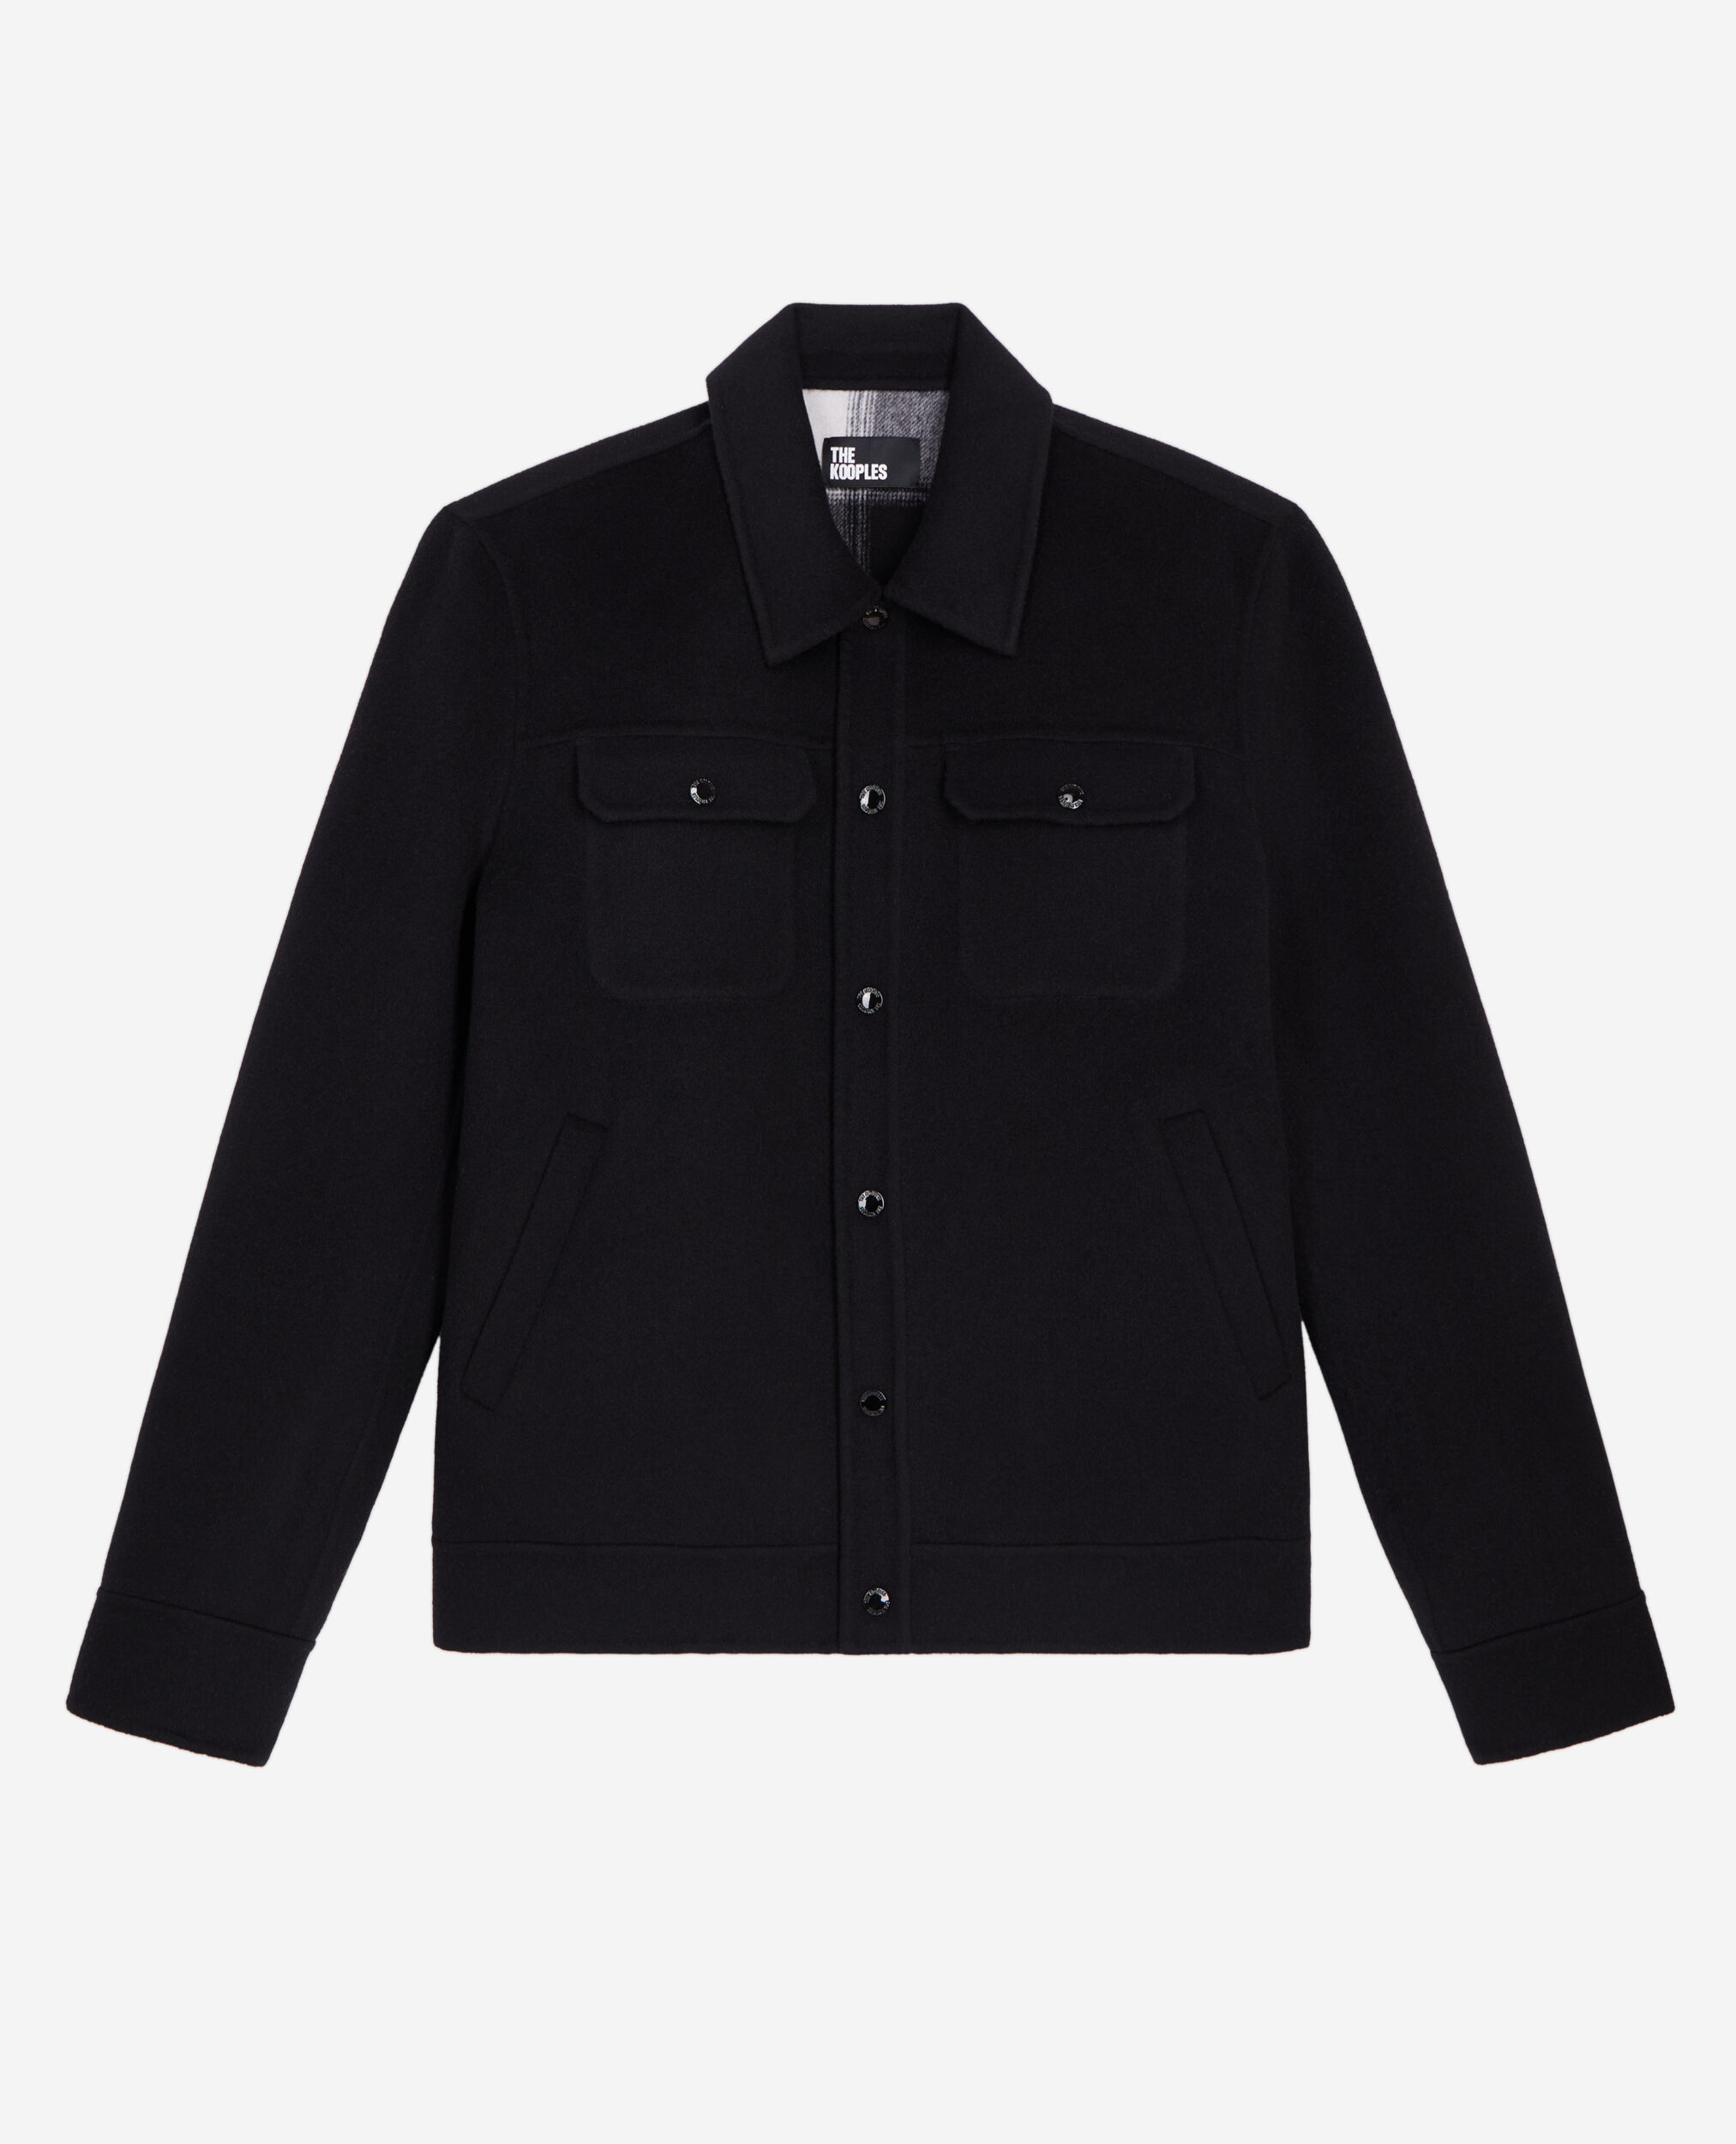 Checked wool-blend overshirt style jacket, BLACK, hi-res image number null